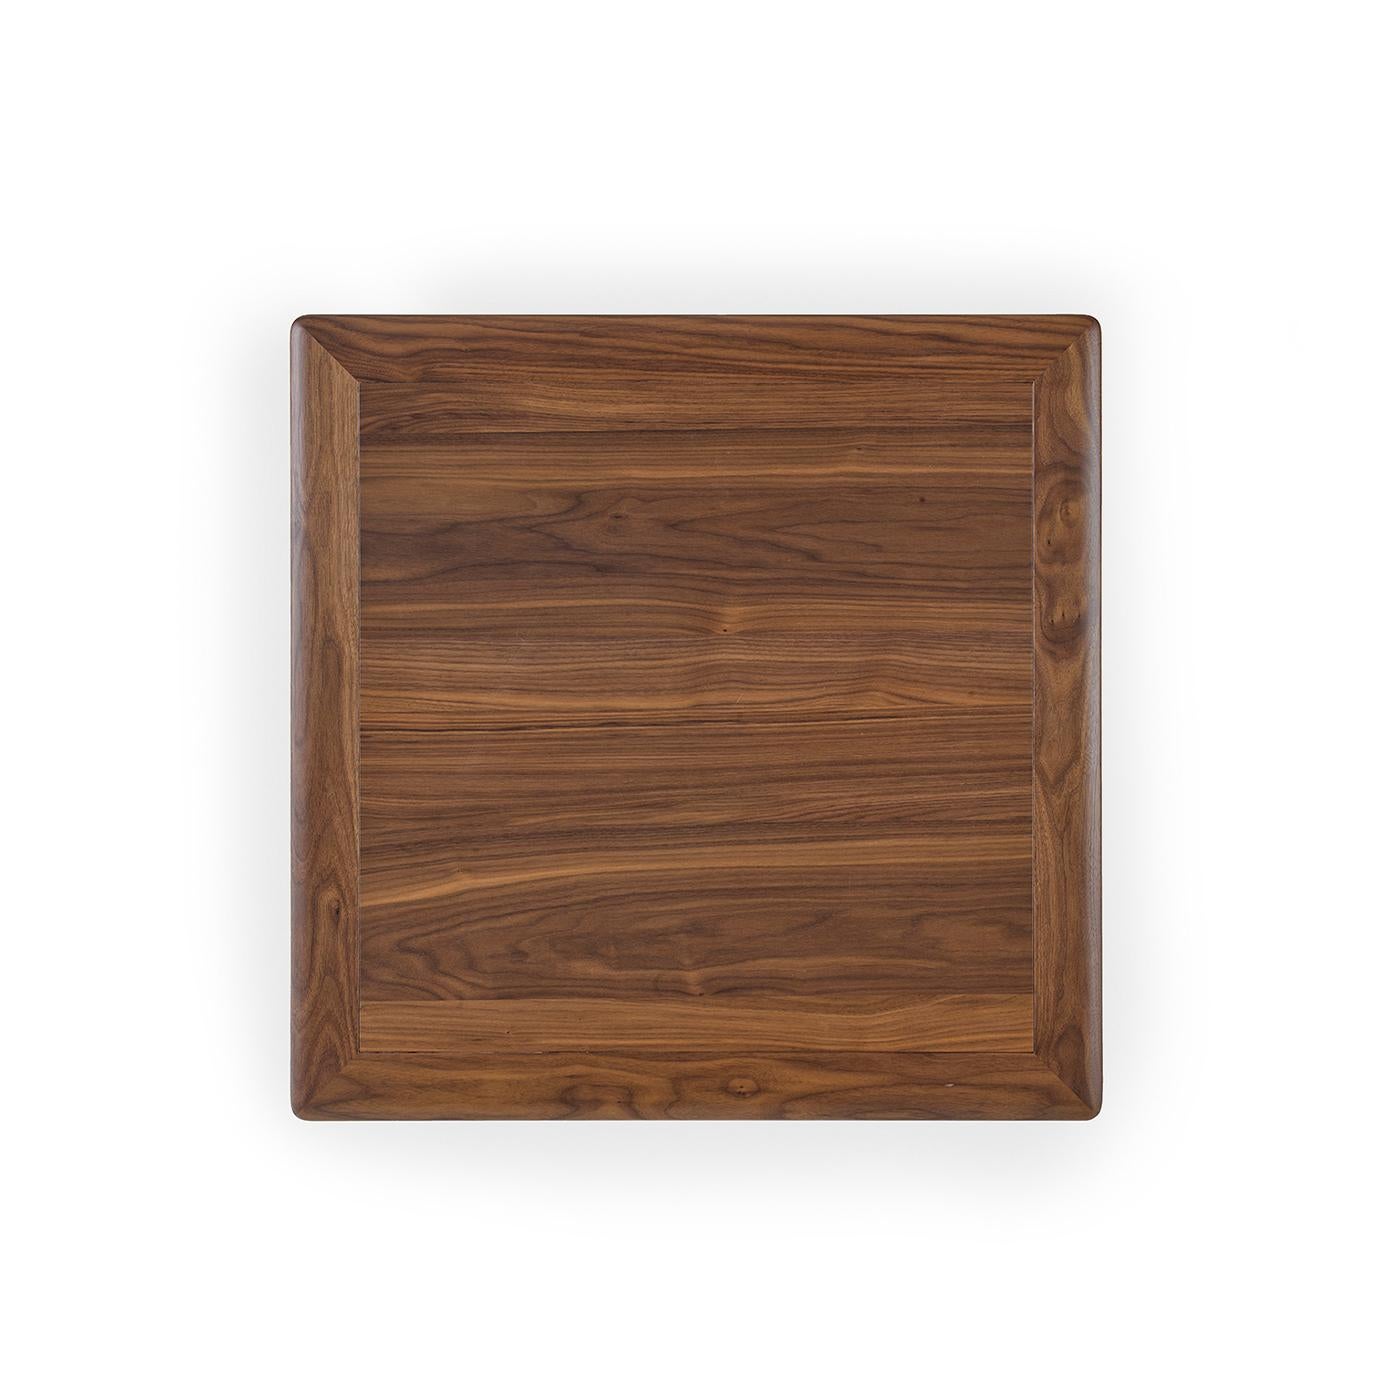 This square coffee table features a Canaletto Havana finish.